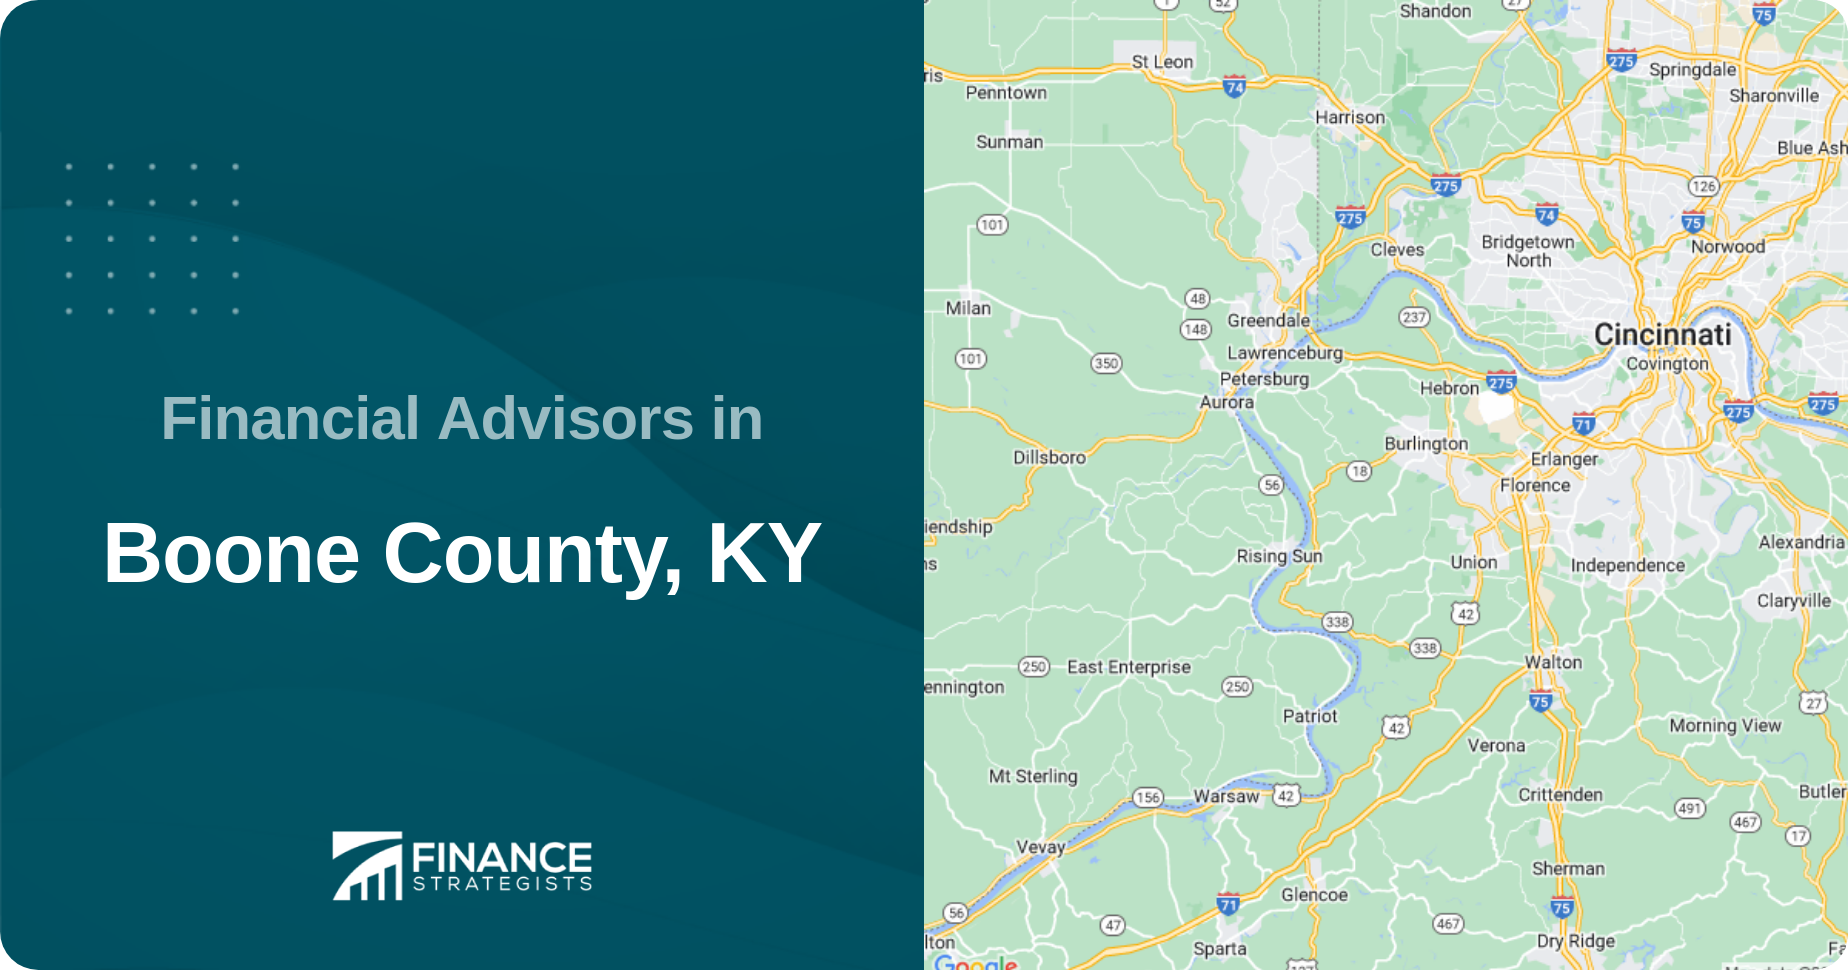 Financial Advisors in Boone County, KY